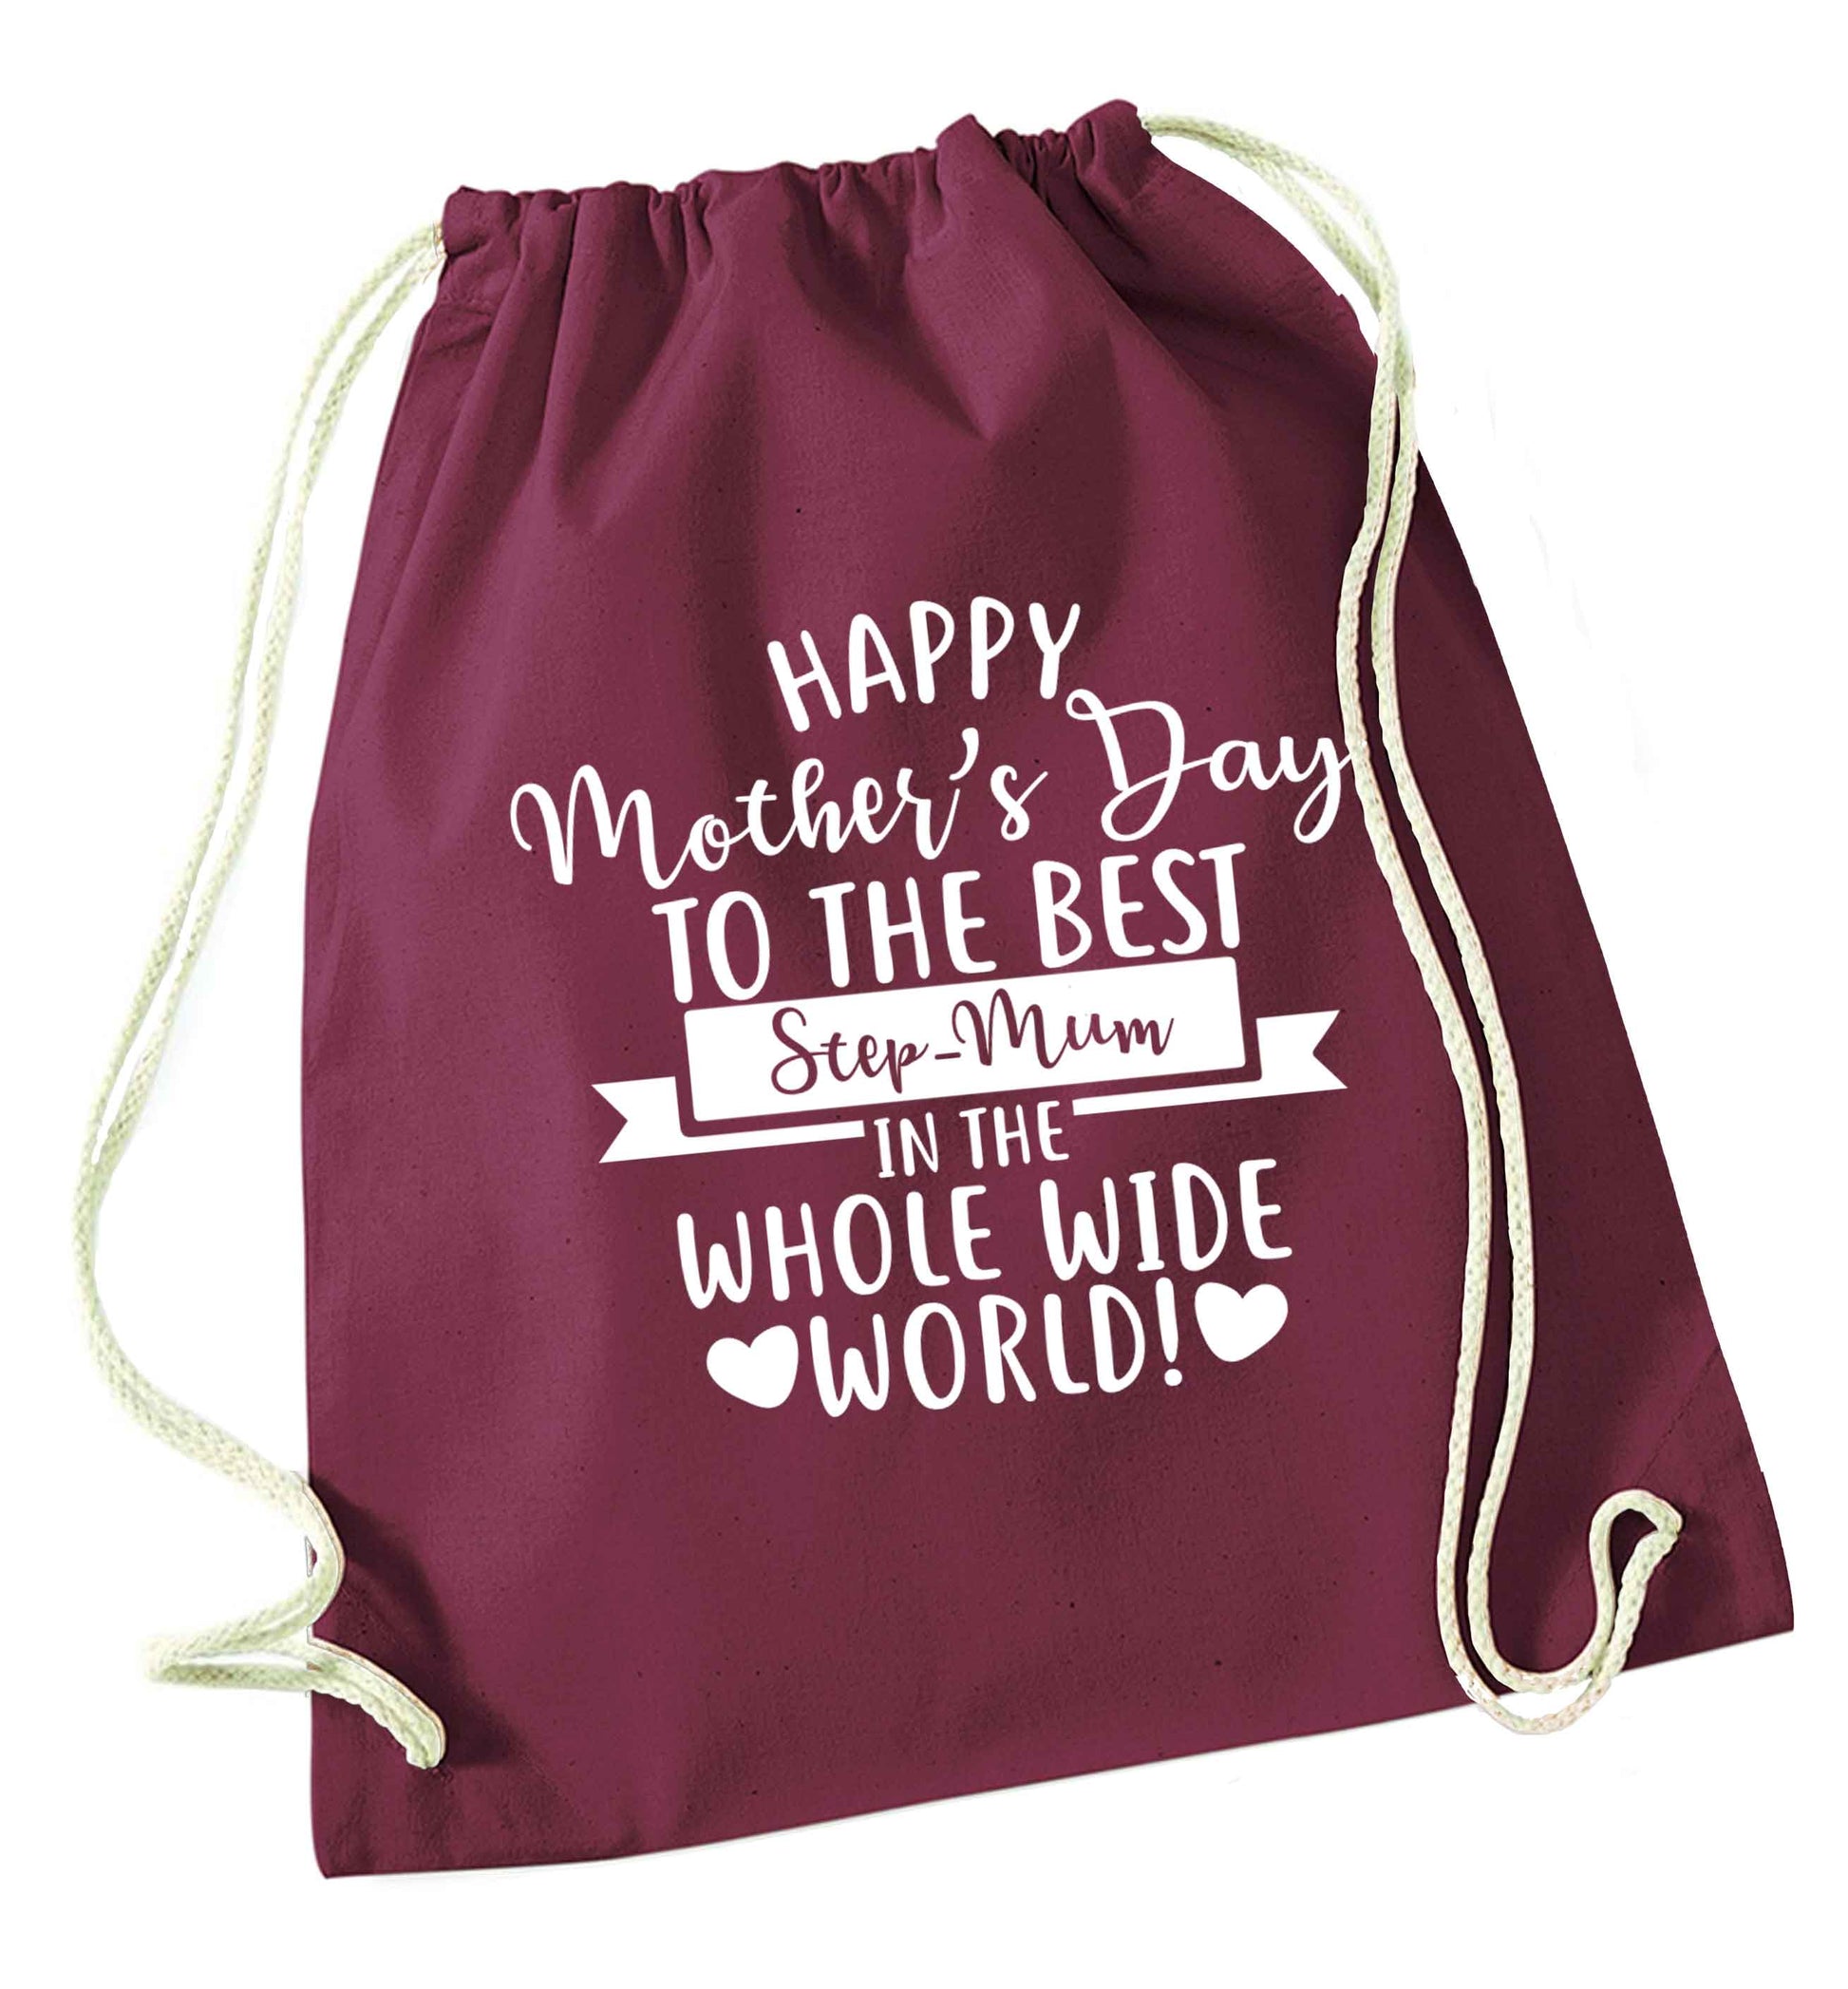 Happy mother's day to the best step-mum in the world maroon drawstring bag